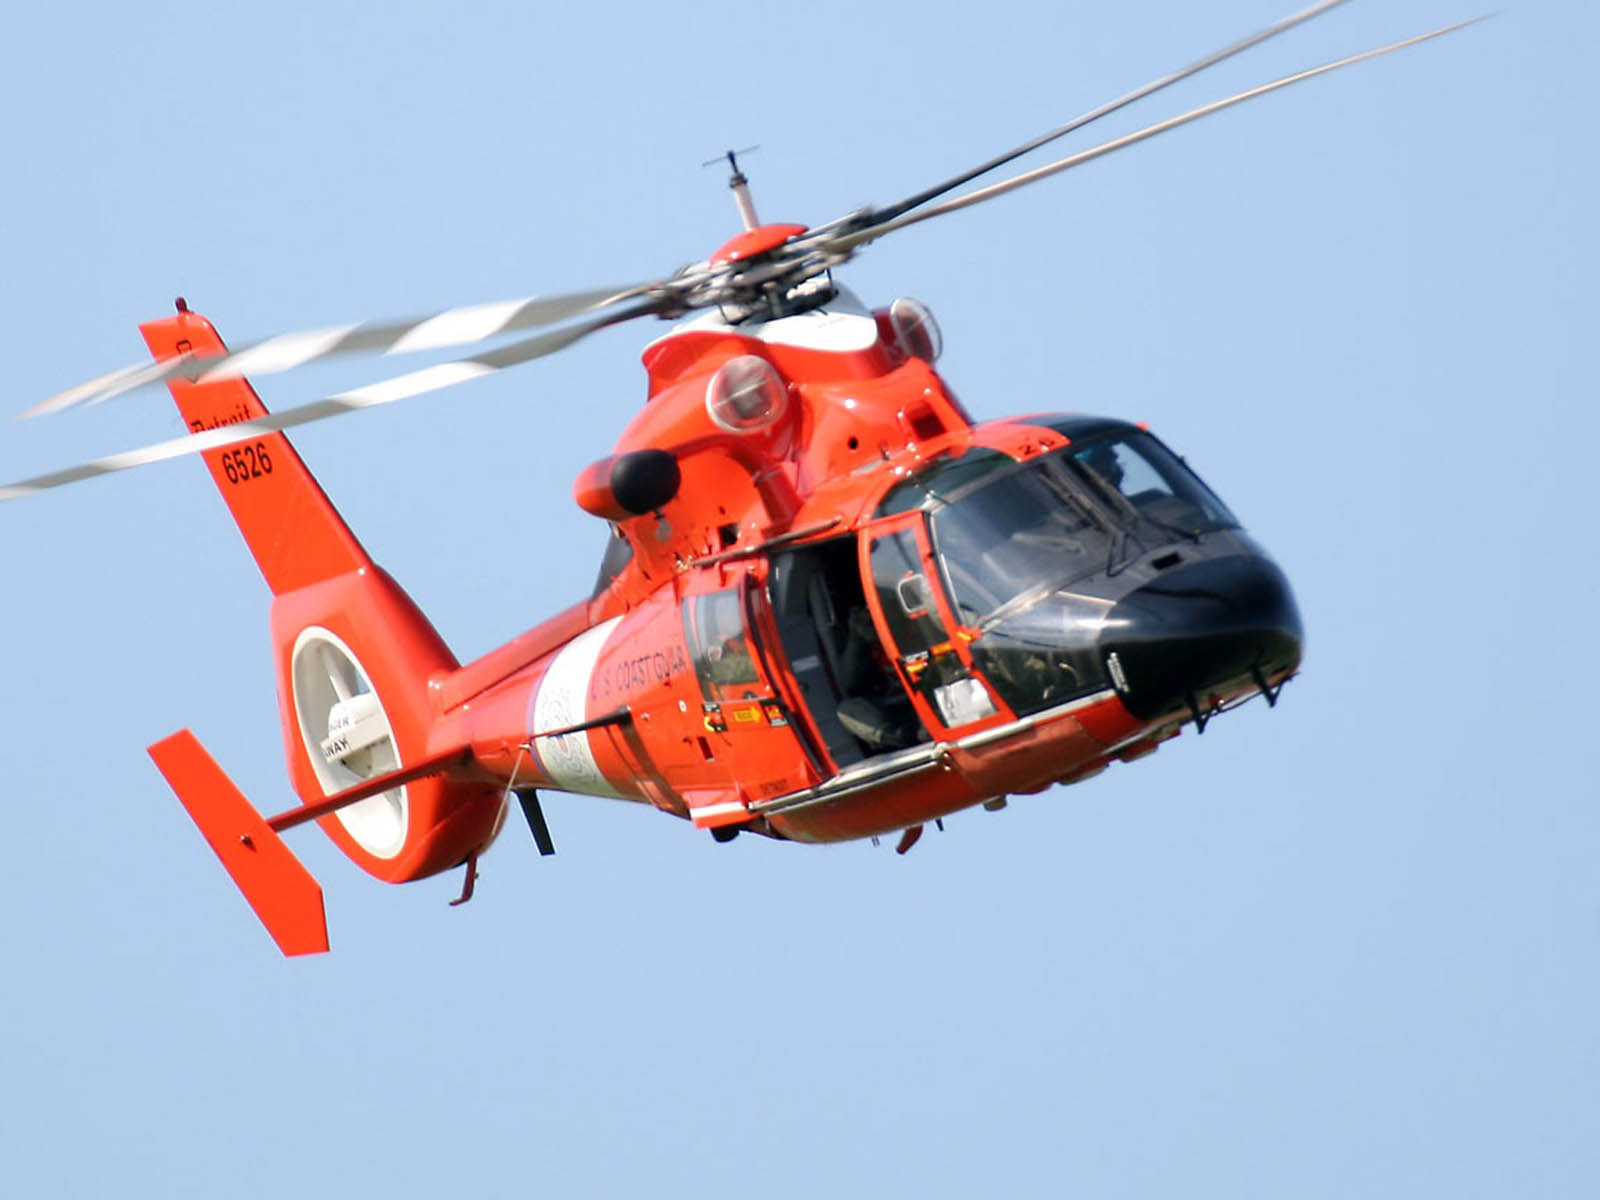 Wallpaper Hh Dolphin Us Coast Guard Helicopter Desktop